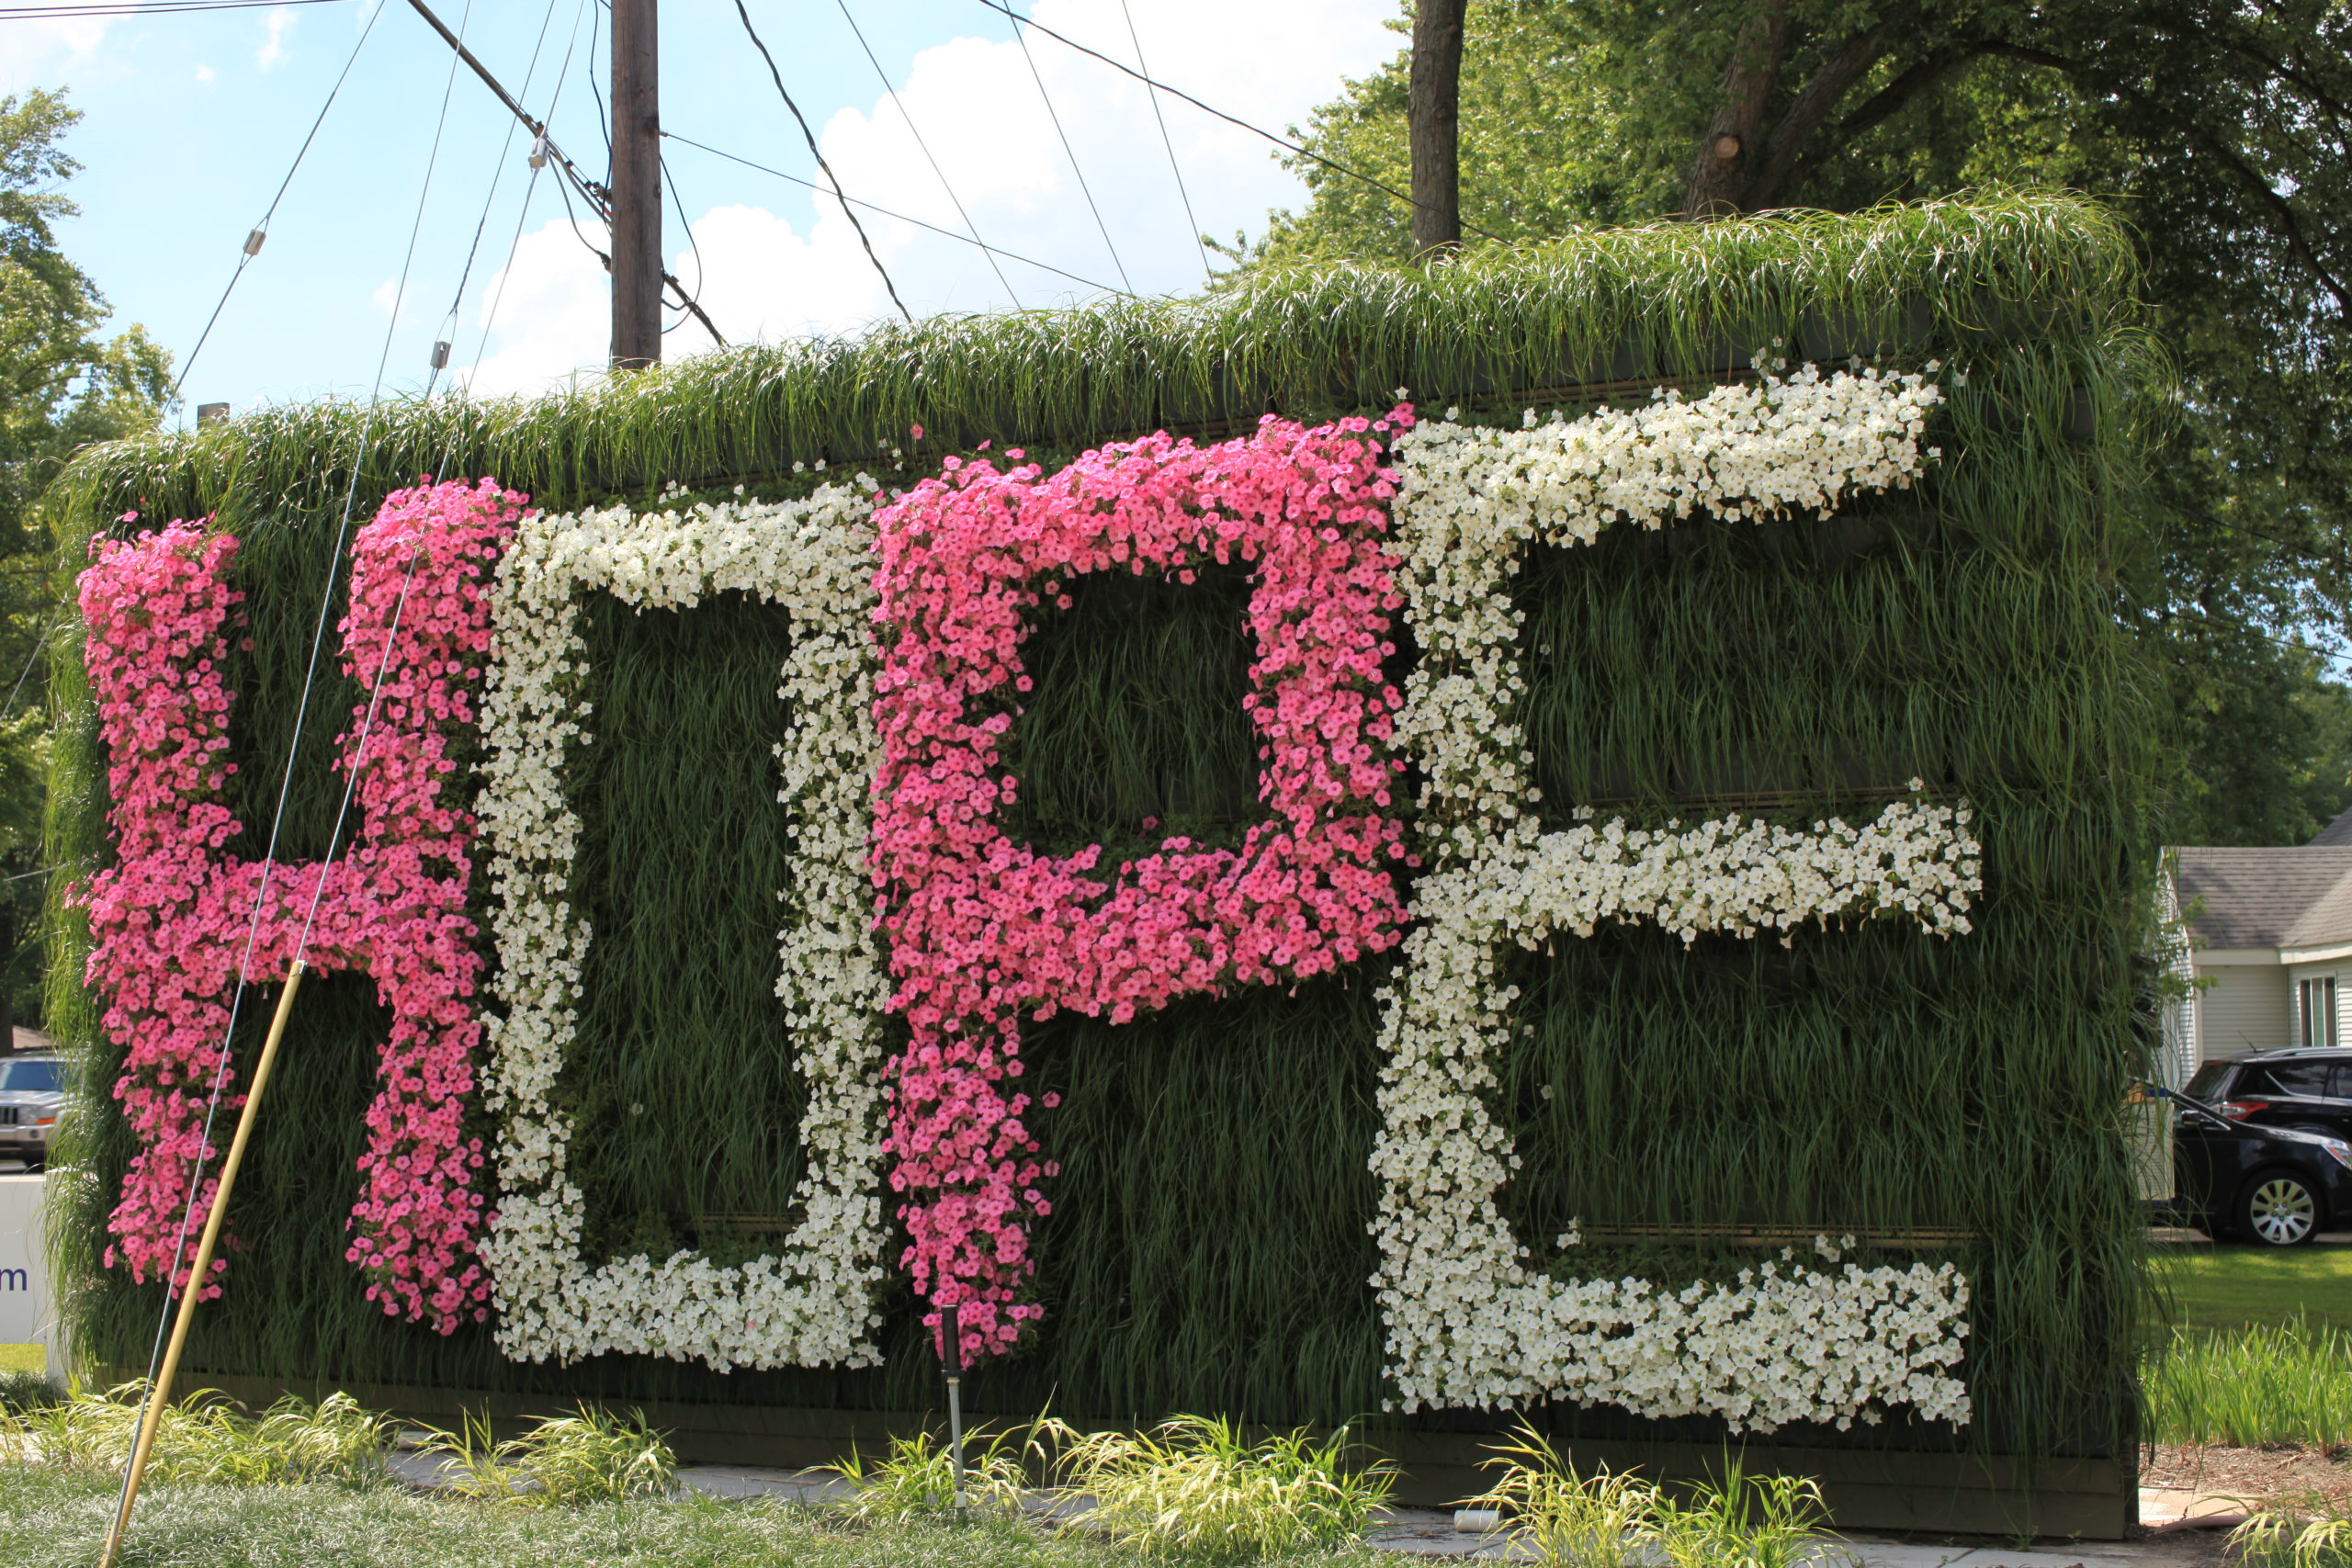 The word HOPE displayed with pink and white annuals.